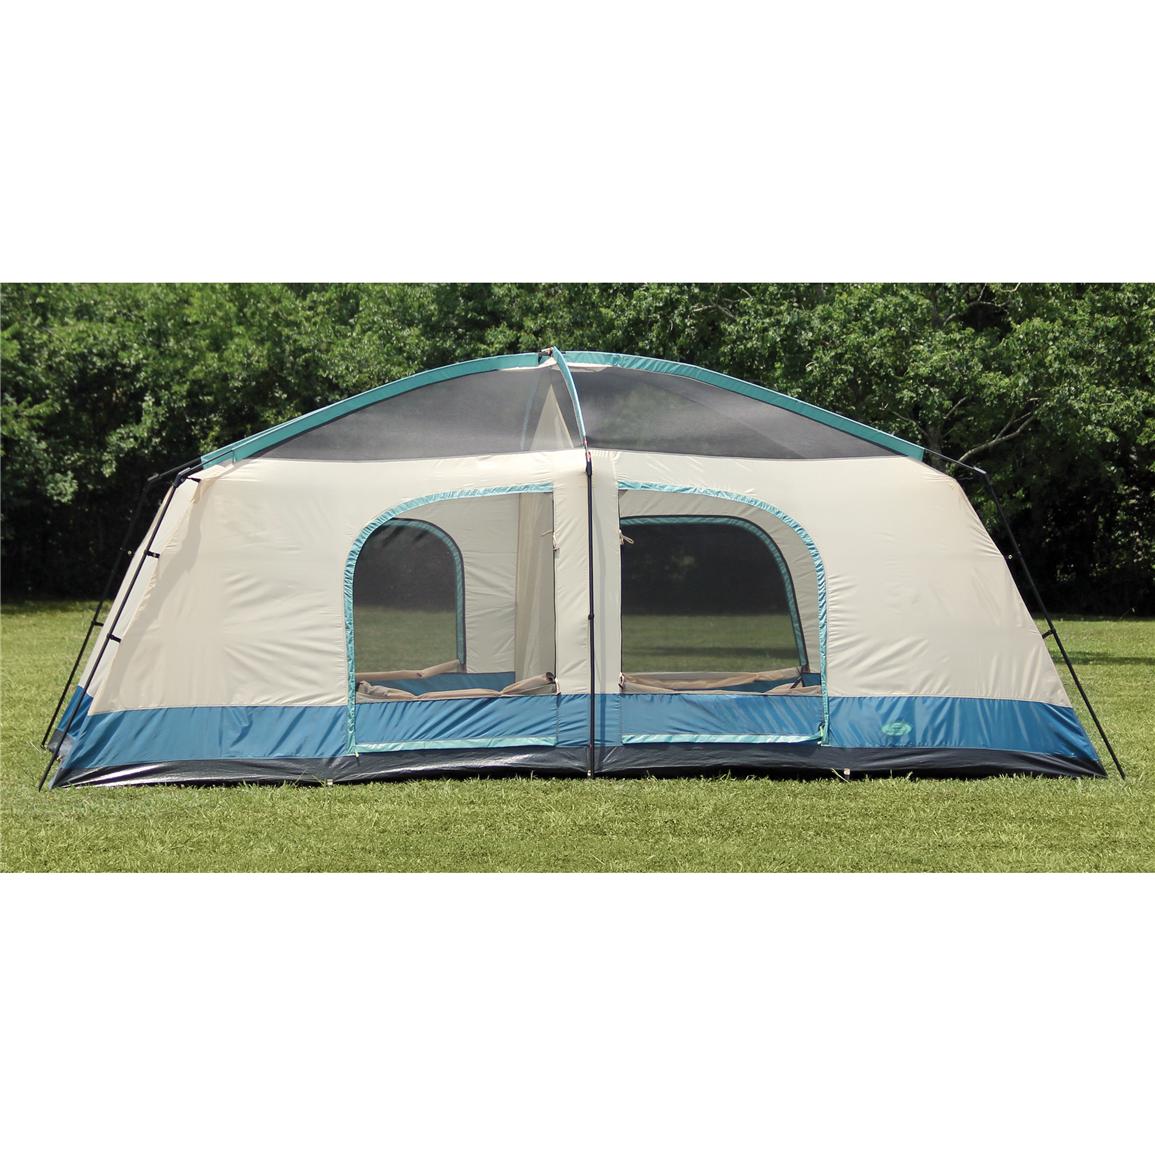 Texsport® Blue Mountain 2 room Cabin Dome Tent 293799, Cabin Tents at Sportsman's Guide